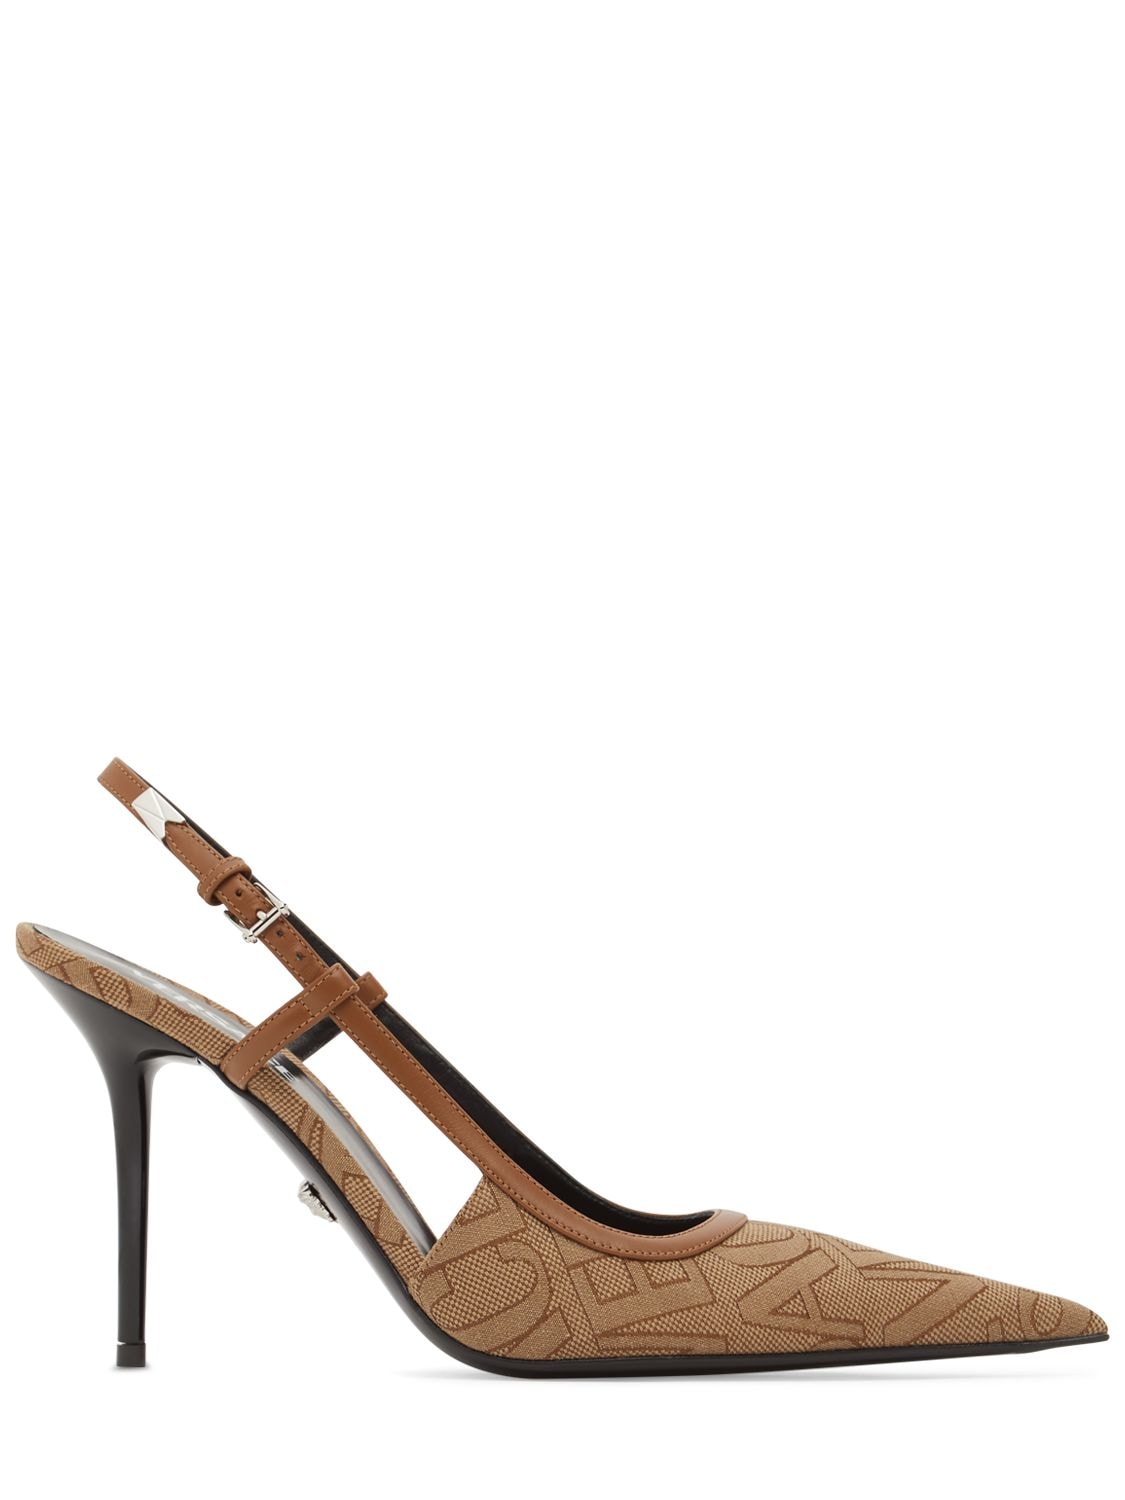 Versace 95mm Jacquard & Leather Slingback Pumps In Beige